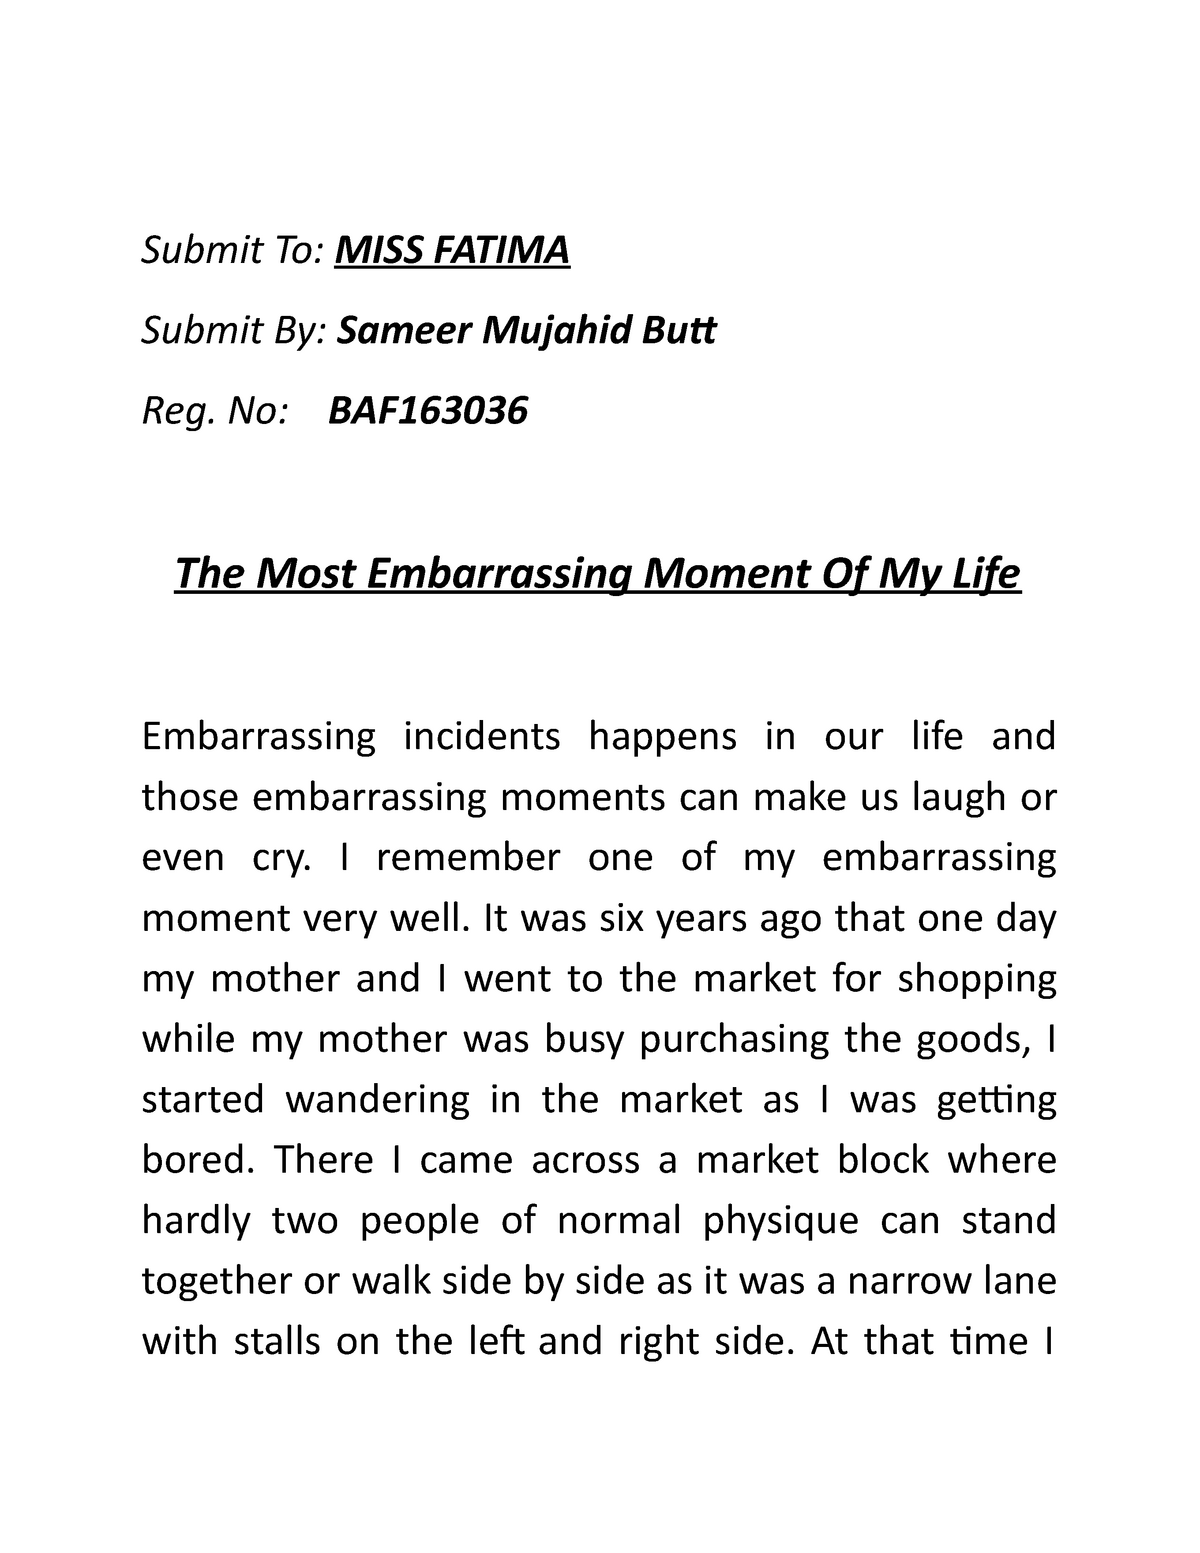 narrative essay about an embarrassing experience